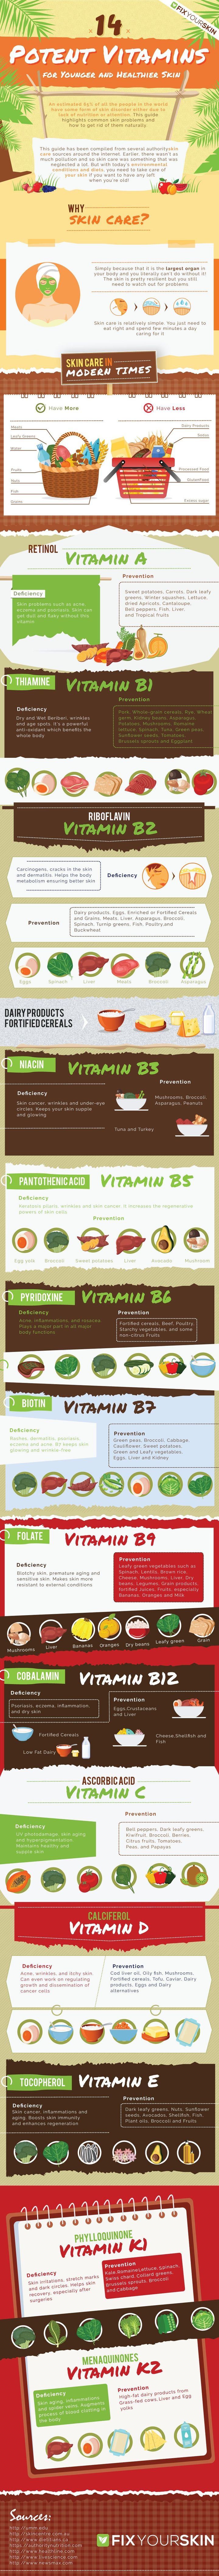 14 Potent Vitamins for Younger and Healthier Skin